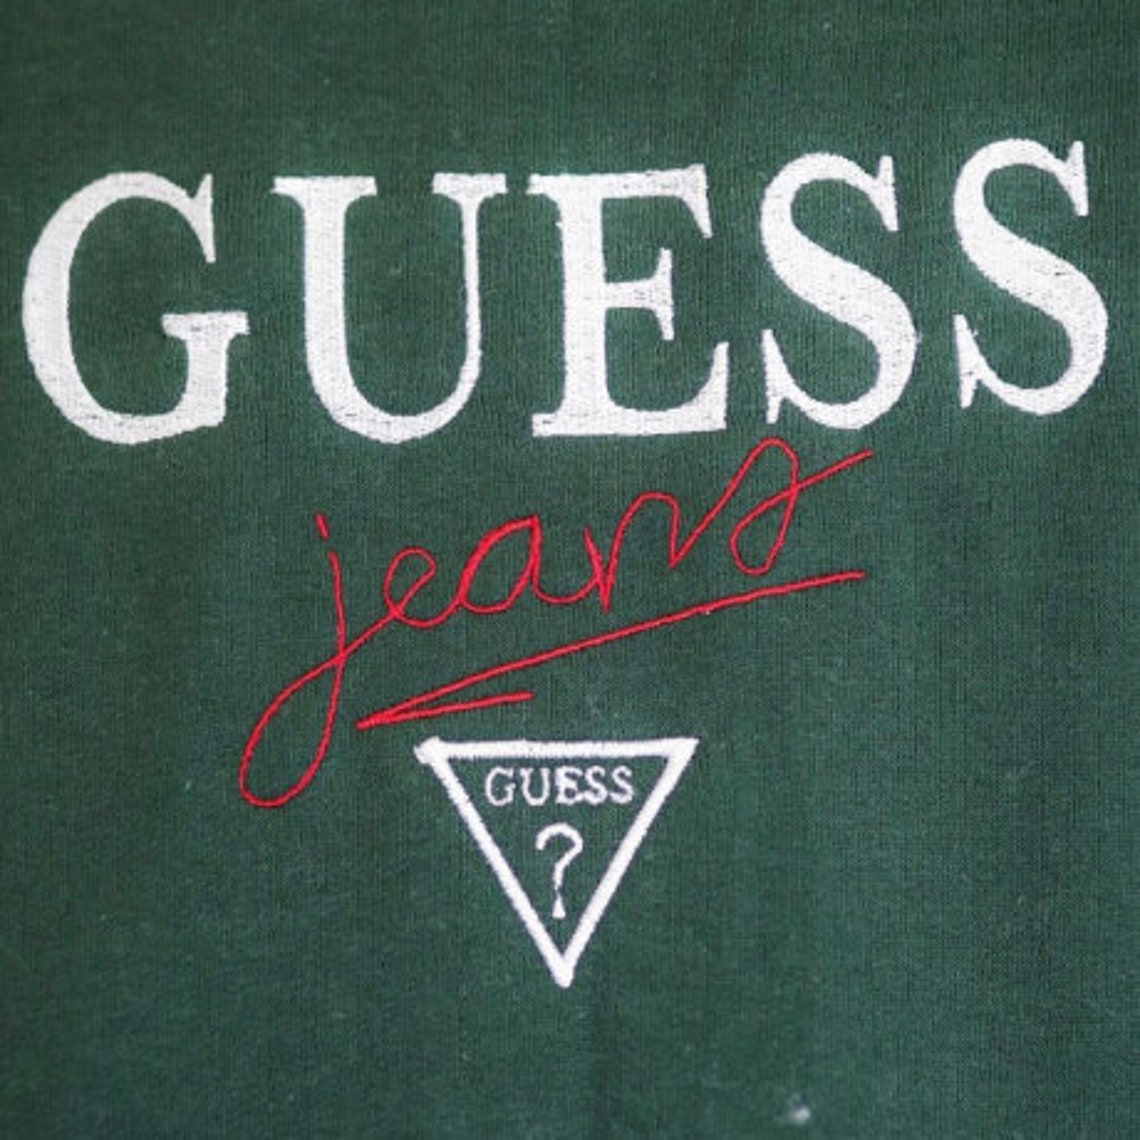 Vintage Guess Jeans Embroidery Download | Etsy